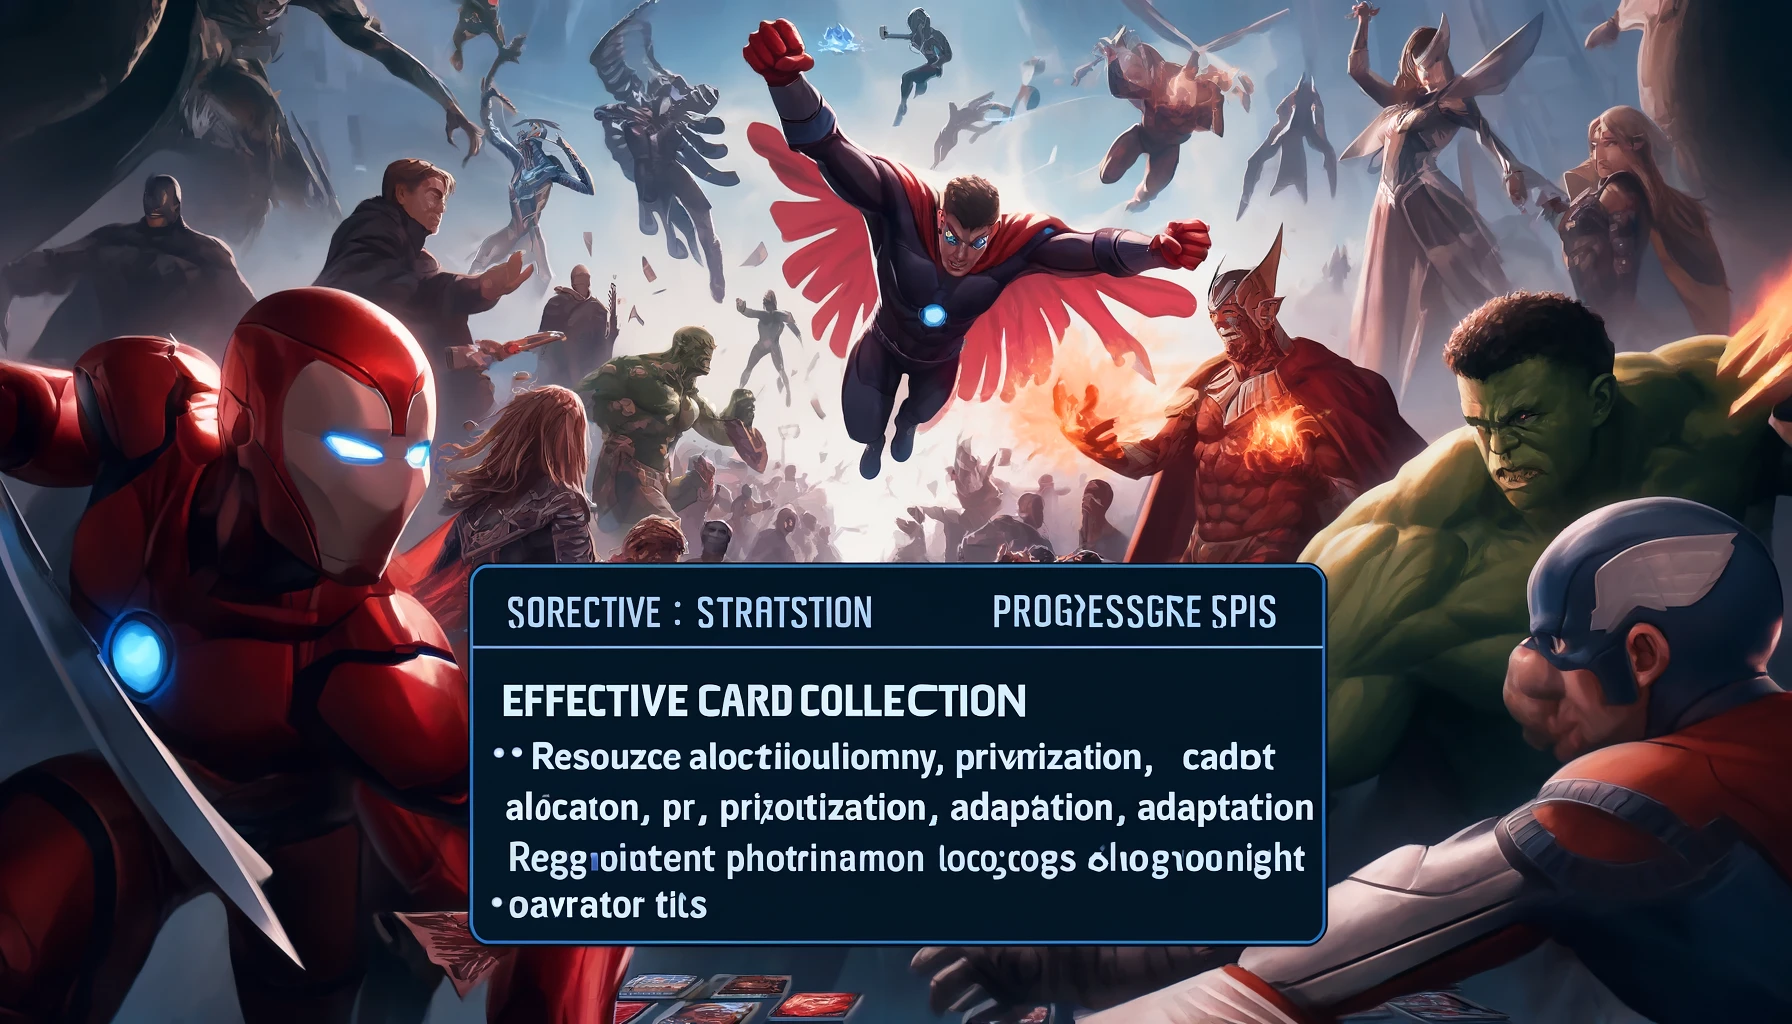 Superheroes and villains strategize with actions symbolizing resource allocation, prioritization, adaptation, and optimization for effective Marvel Snap card collection. Cards are secondary, while characters emphasize deck-building strategies.